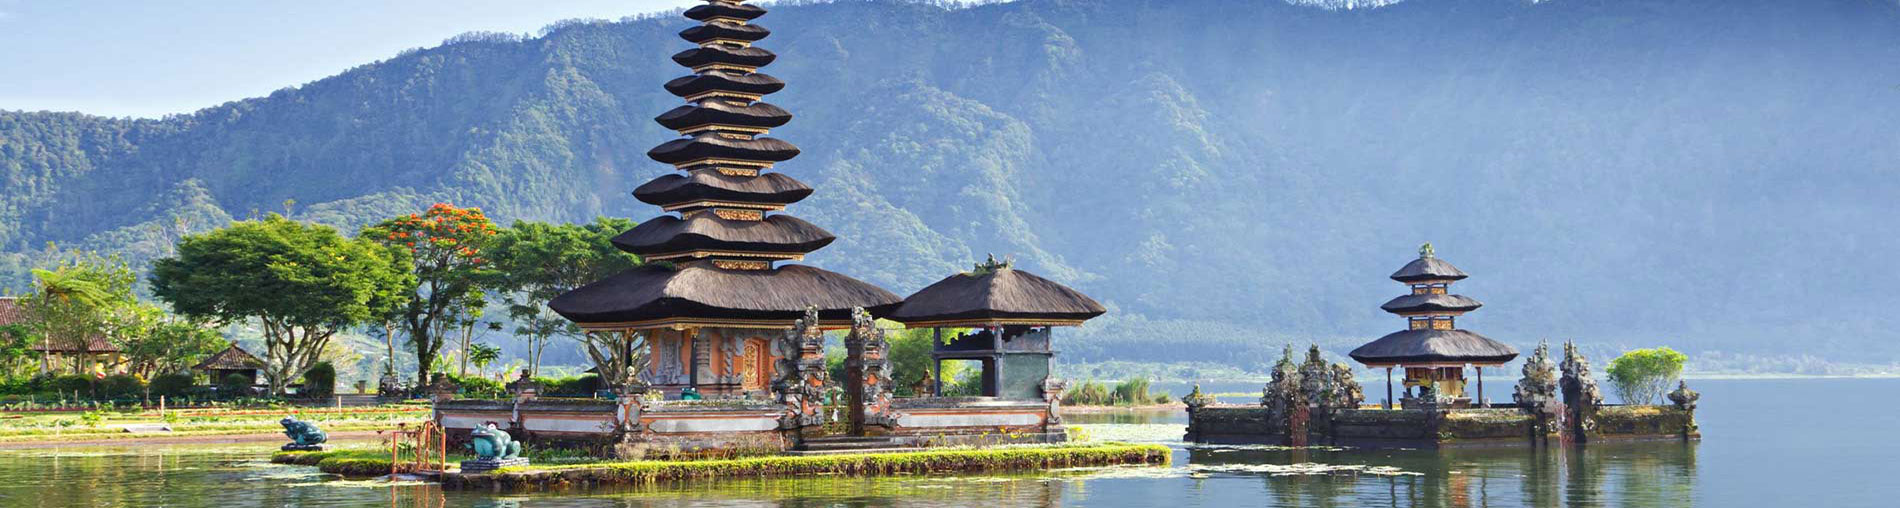 Indonesia Holiday Package - 5 Nights